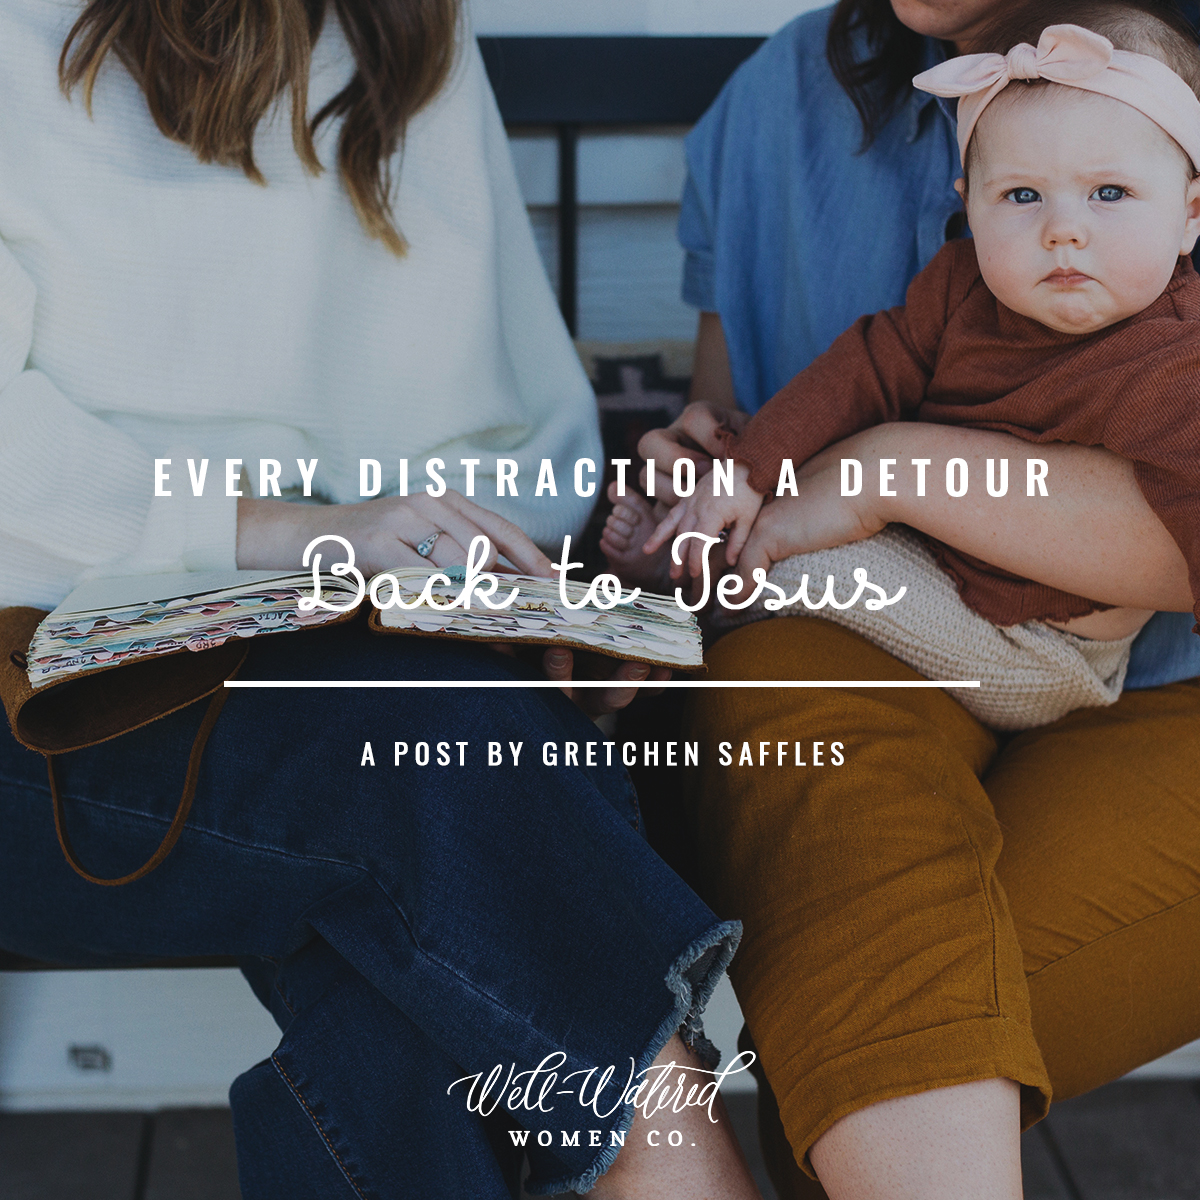 Well-Watered Women-Blog-Every Distraction a Detour Back to Jesus